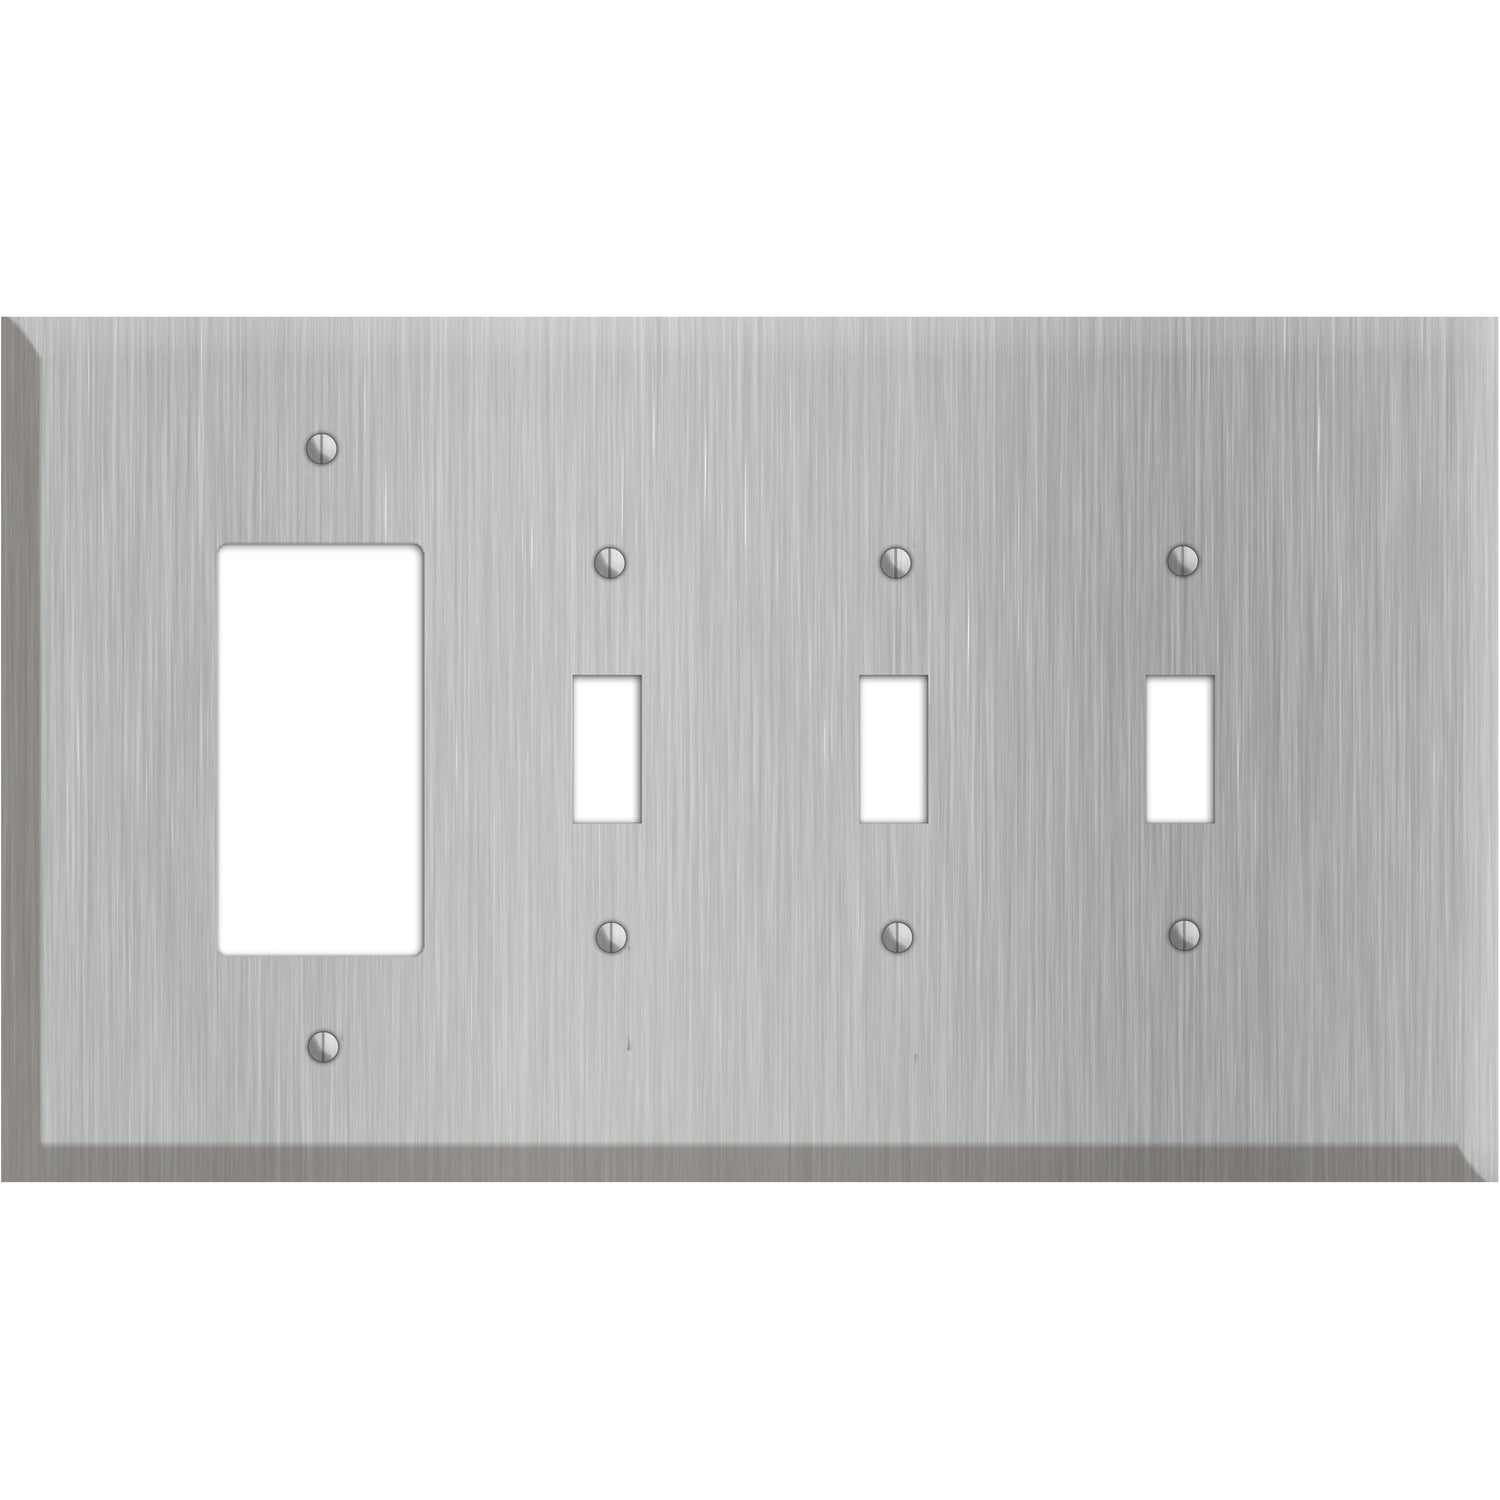 Oversized Discontinued Stainless Steel Rocker / 3 Toggle Wallplate